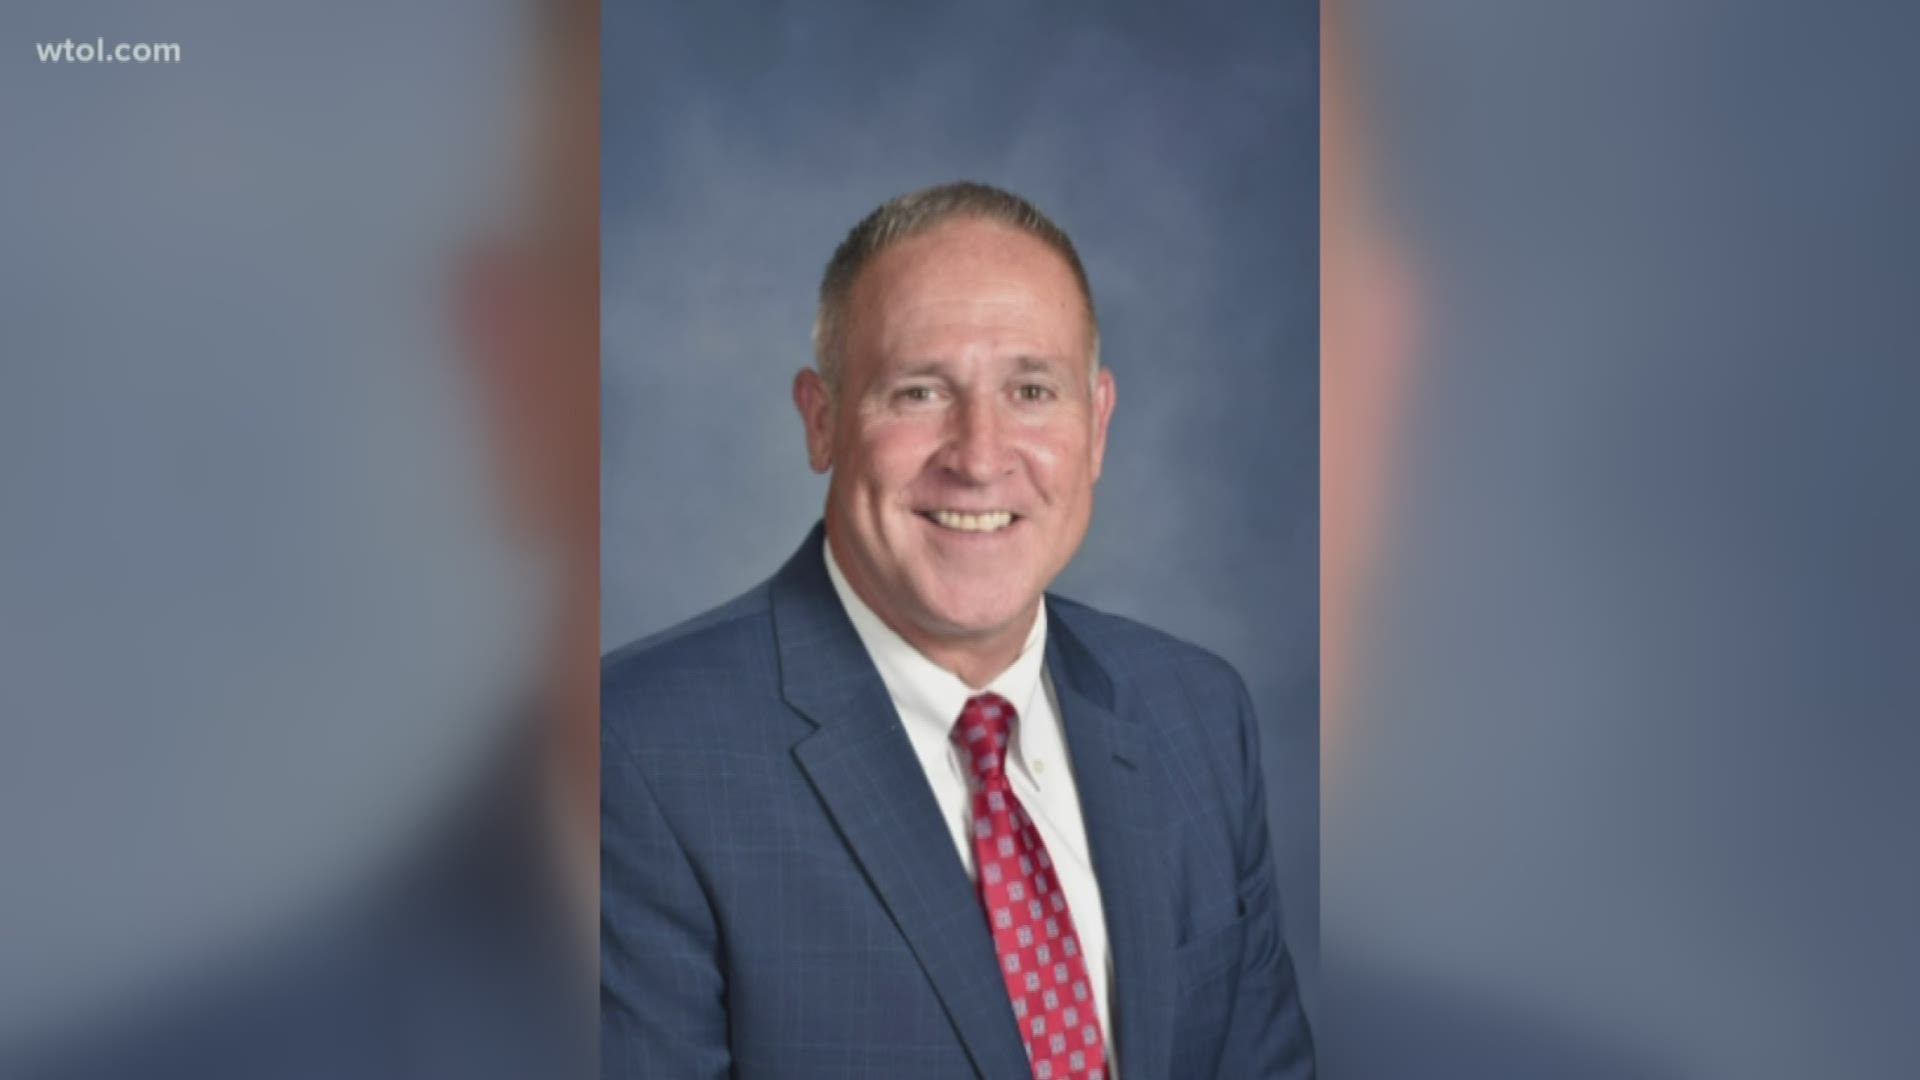 Superintendent Gary Barber was pulled over by a state trooper in Marion, and it was reported that he refused a DUI test on the scene.